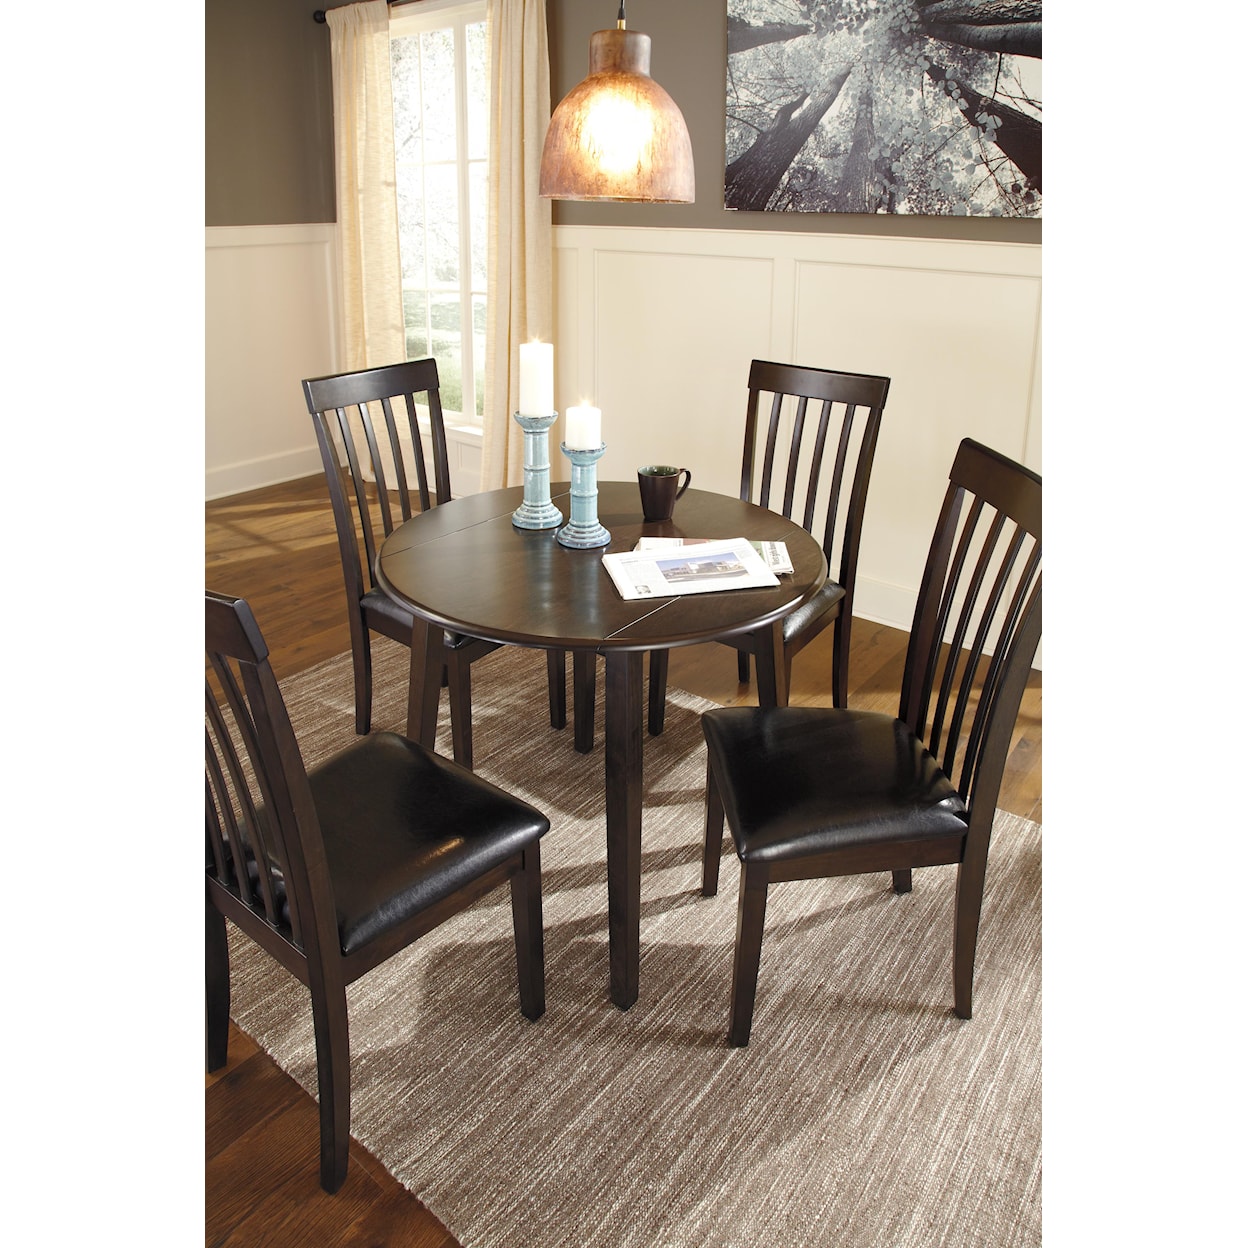 Signature Design by Ashley Hammis 5pc Dining Room Group